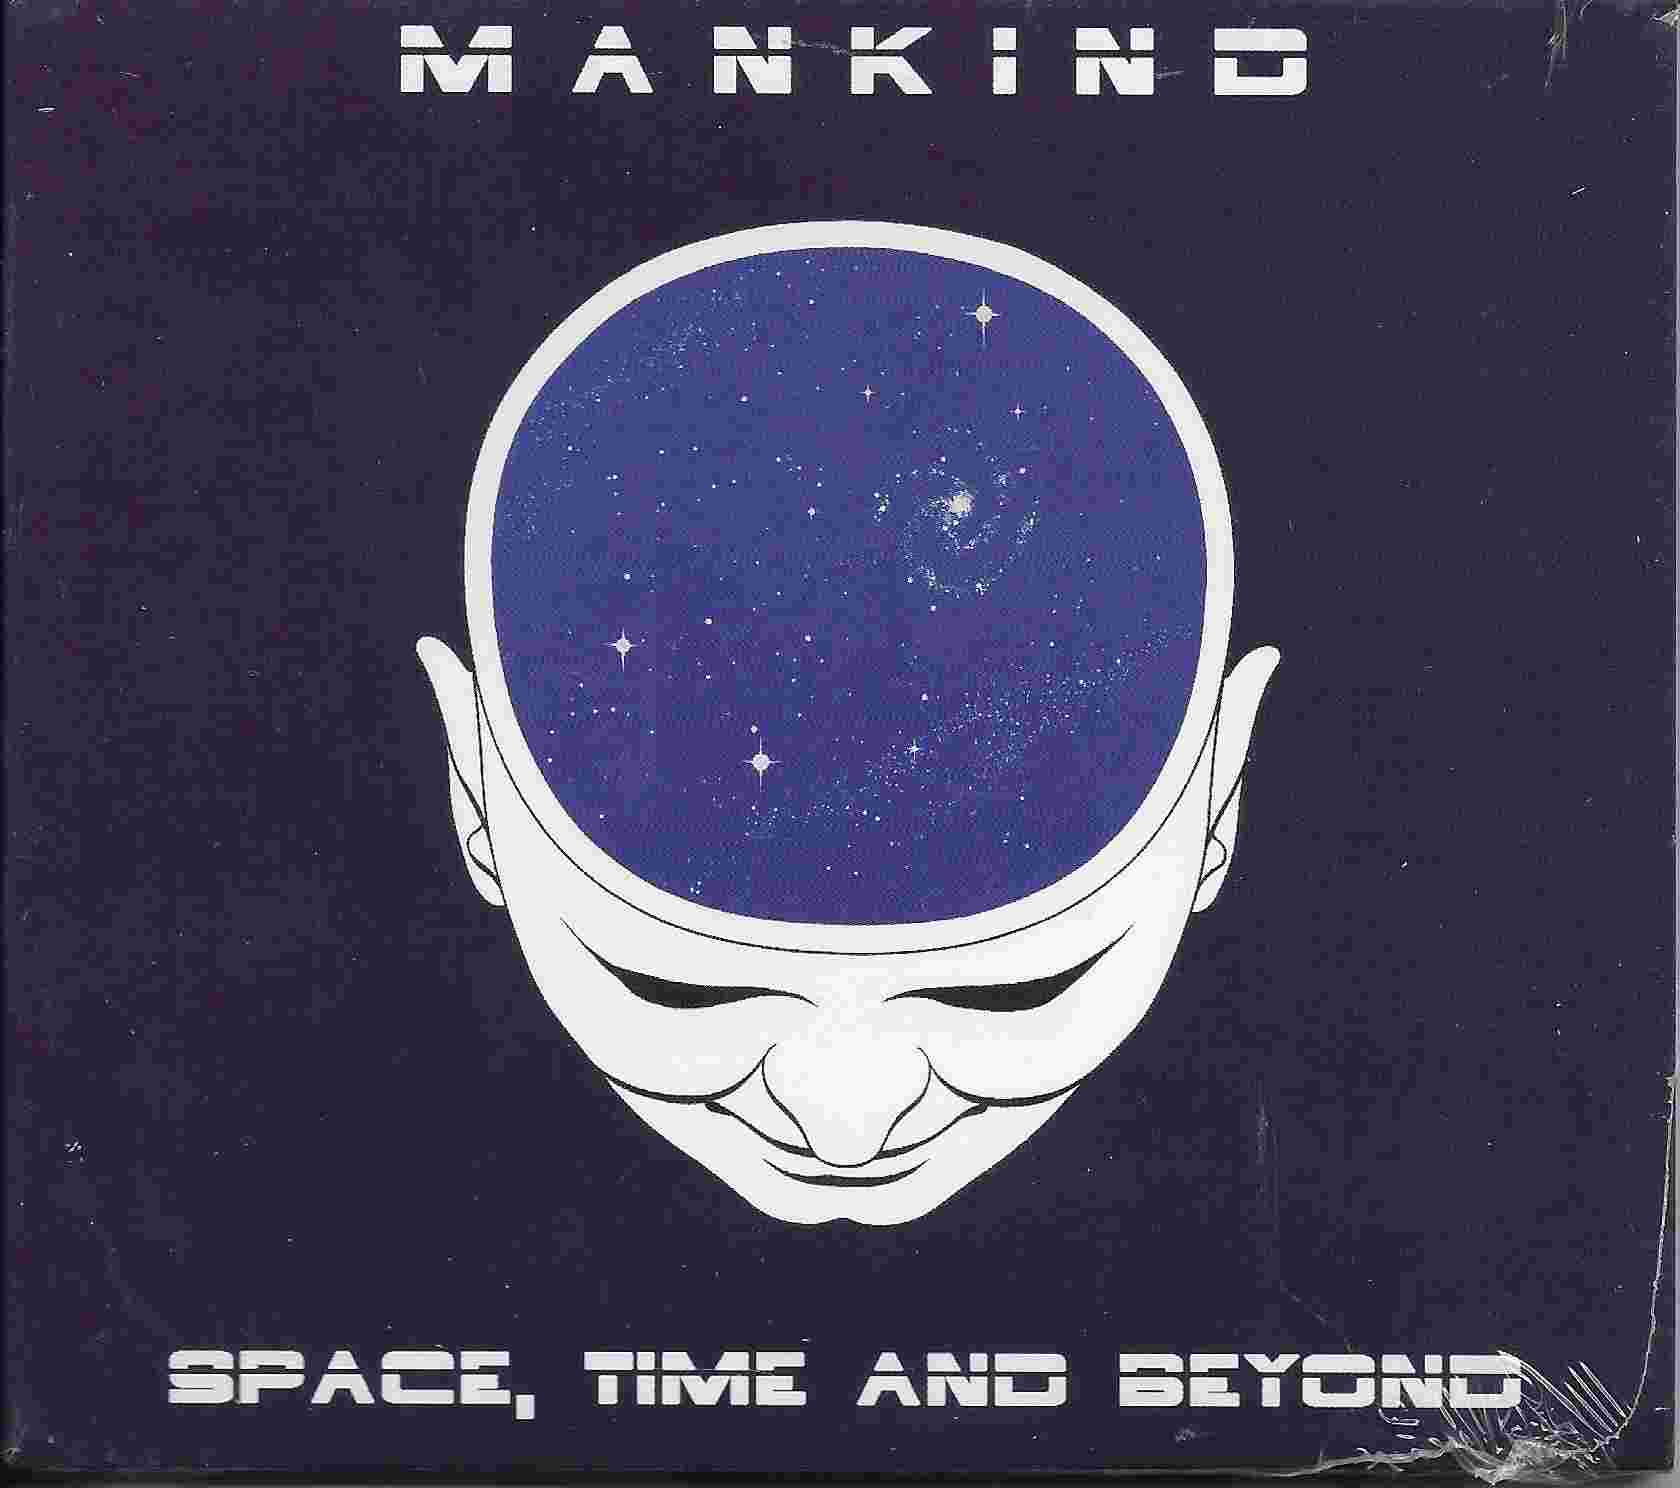 Picture of Space, time and beyond by artist Mankind from the BBC cds - Records and Tapes library